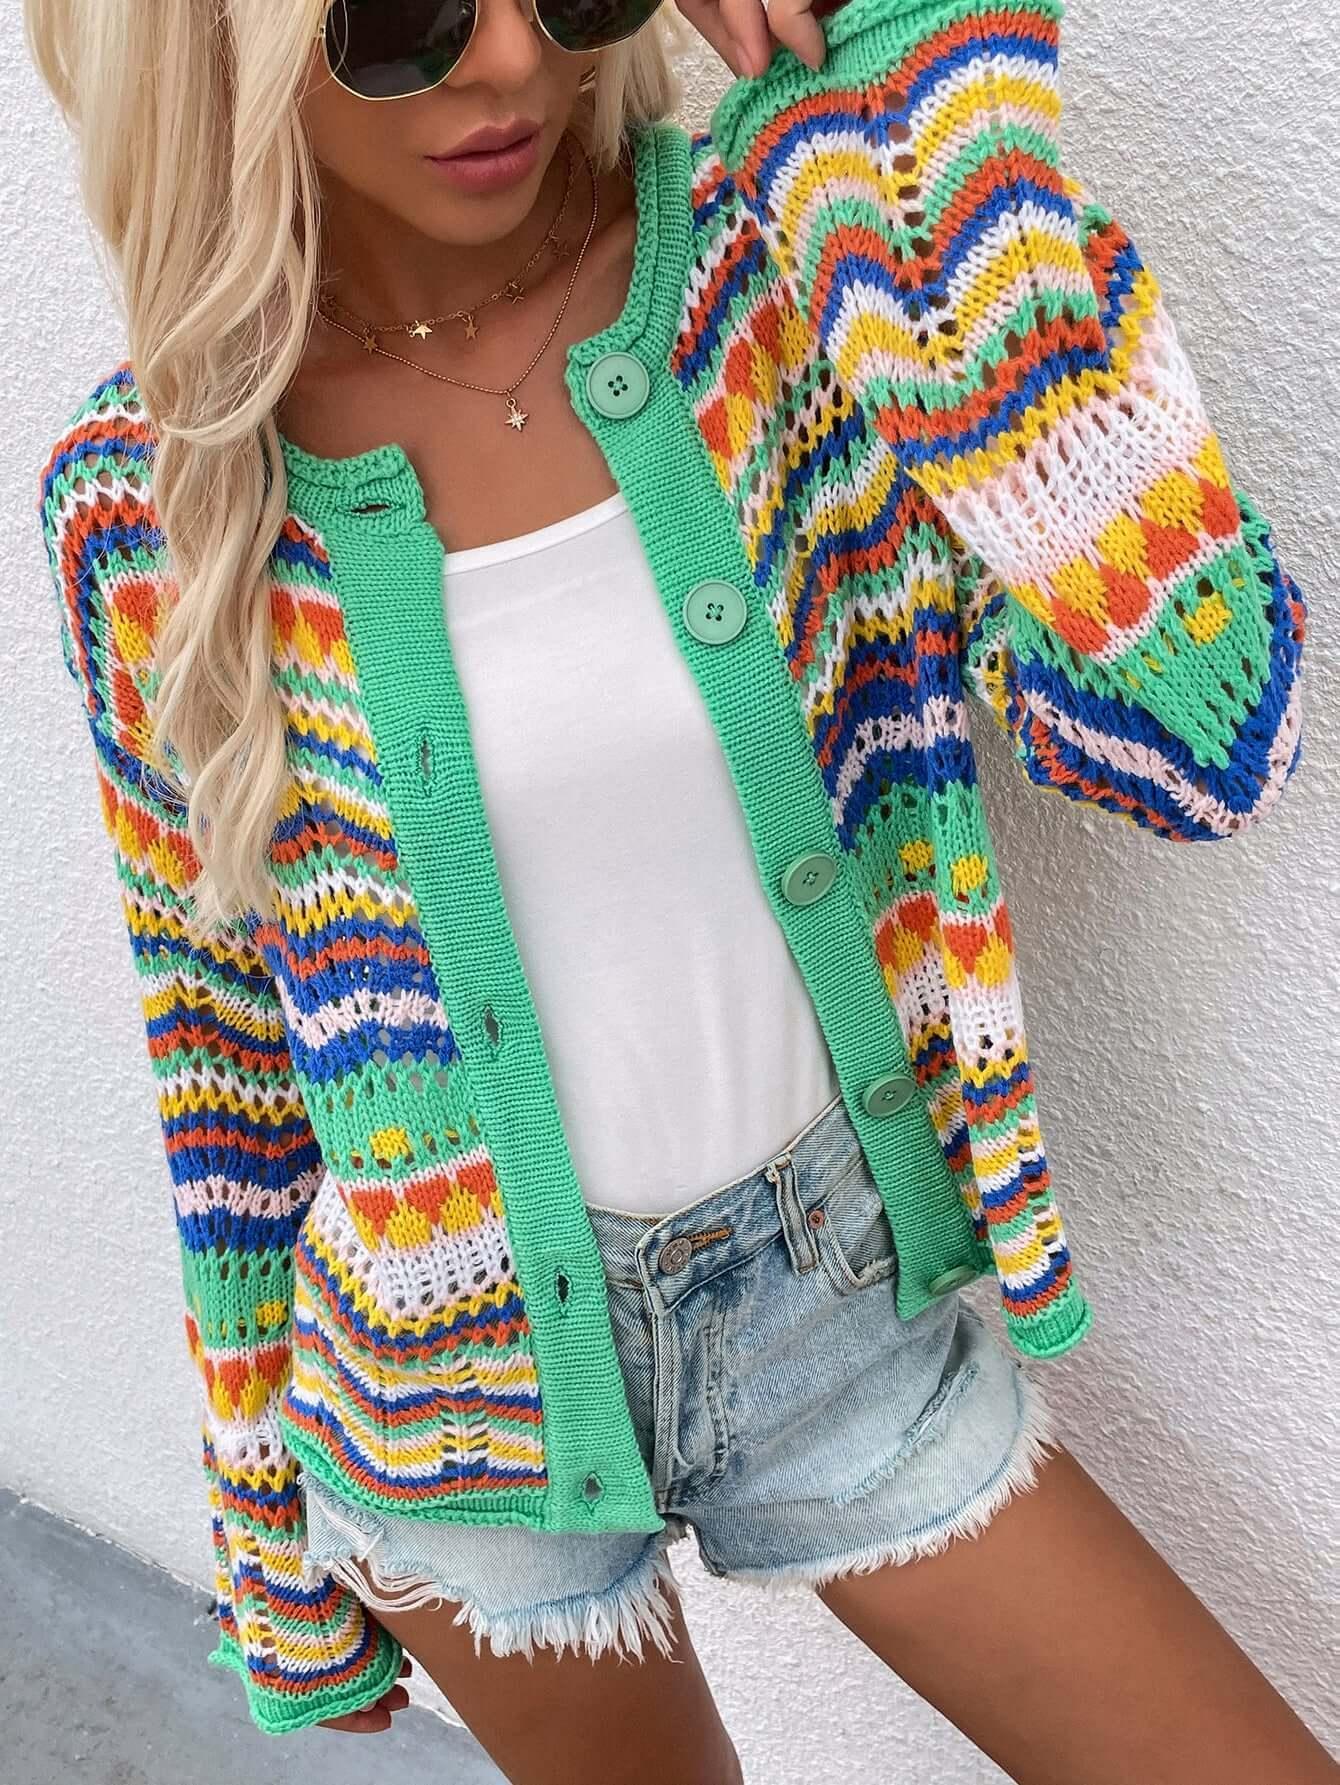 Chevron Cardigan - green striped cardigan hip length with pockets and button Front. #Firefly Lane Boutique1